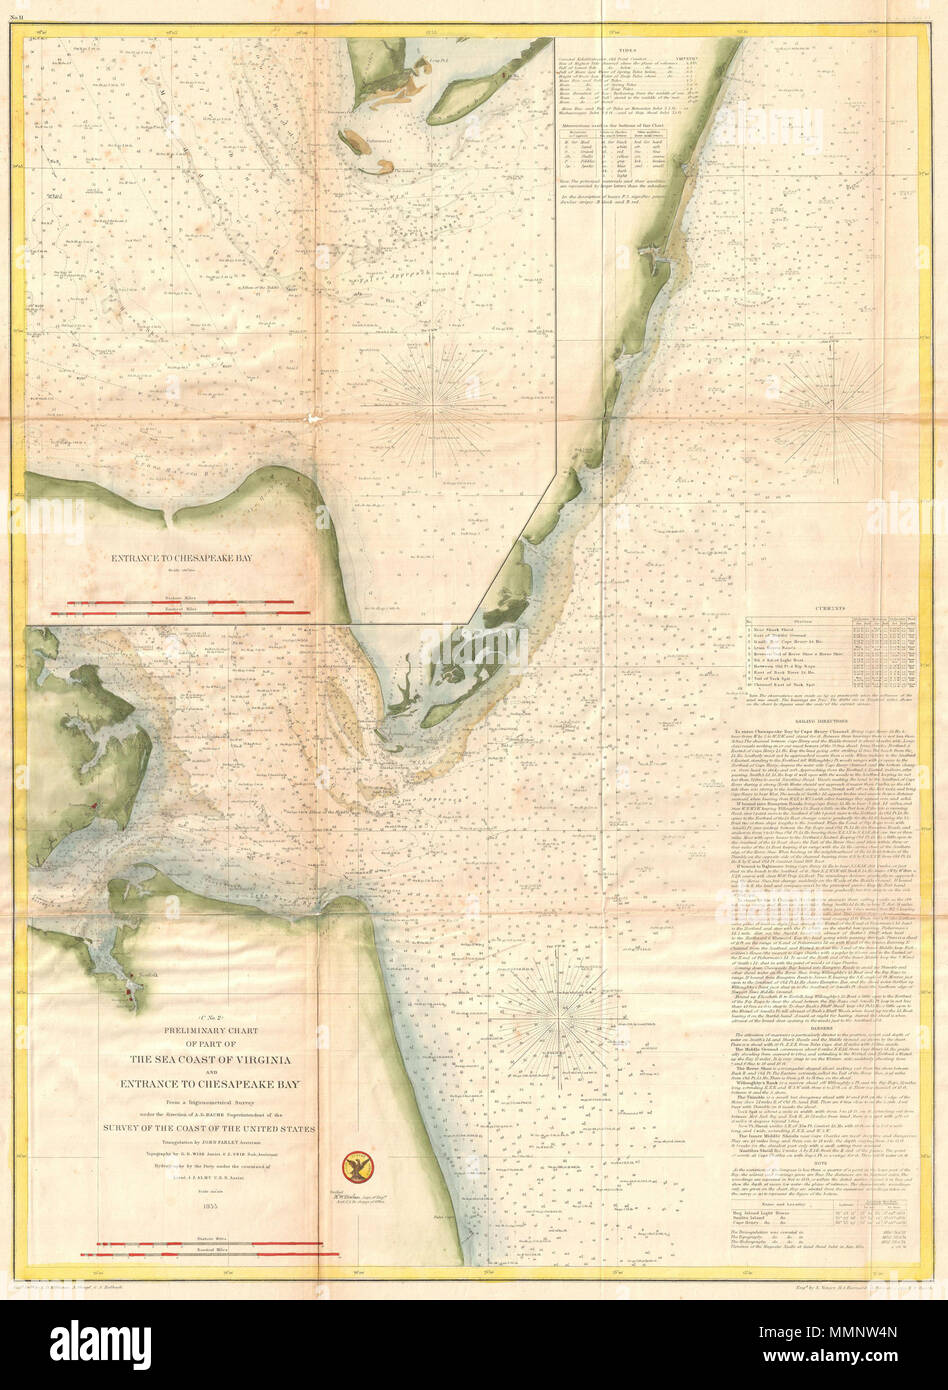 .  English: An uncommon nautical chart or map of the entrance to the Chesapeake Bay issued in 1855 by the U.S. Coast Survey. This map covers from Norfolk, Virginia to Gargathy Inlet. The chart features countless depths soundings as well as detailed sailing instructions and notes on currents in the lower right quadrant. The upper left quadrant is dominated by a large inset focusing on the entrance to the Chesapeake Bay between Smith Island and Cape Henry. The triangulation for this chart was completed by John Farley. The topography is the work of G. D. Wise and J. Seib. The Hydrography was comp Stock Photo